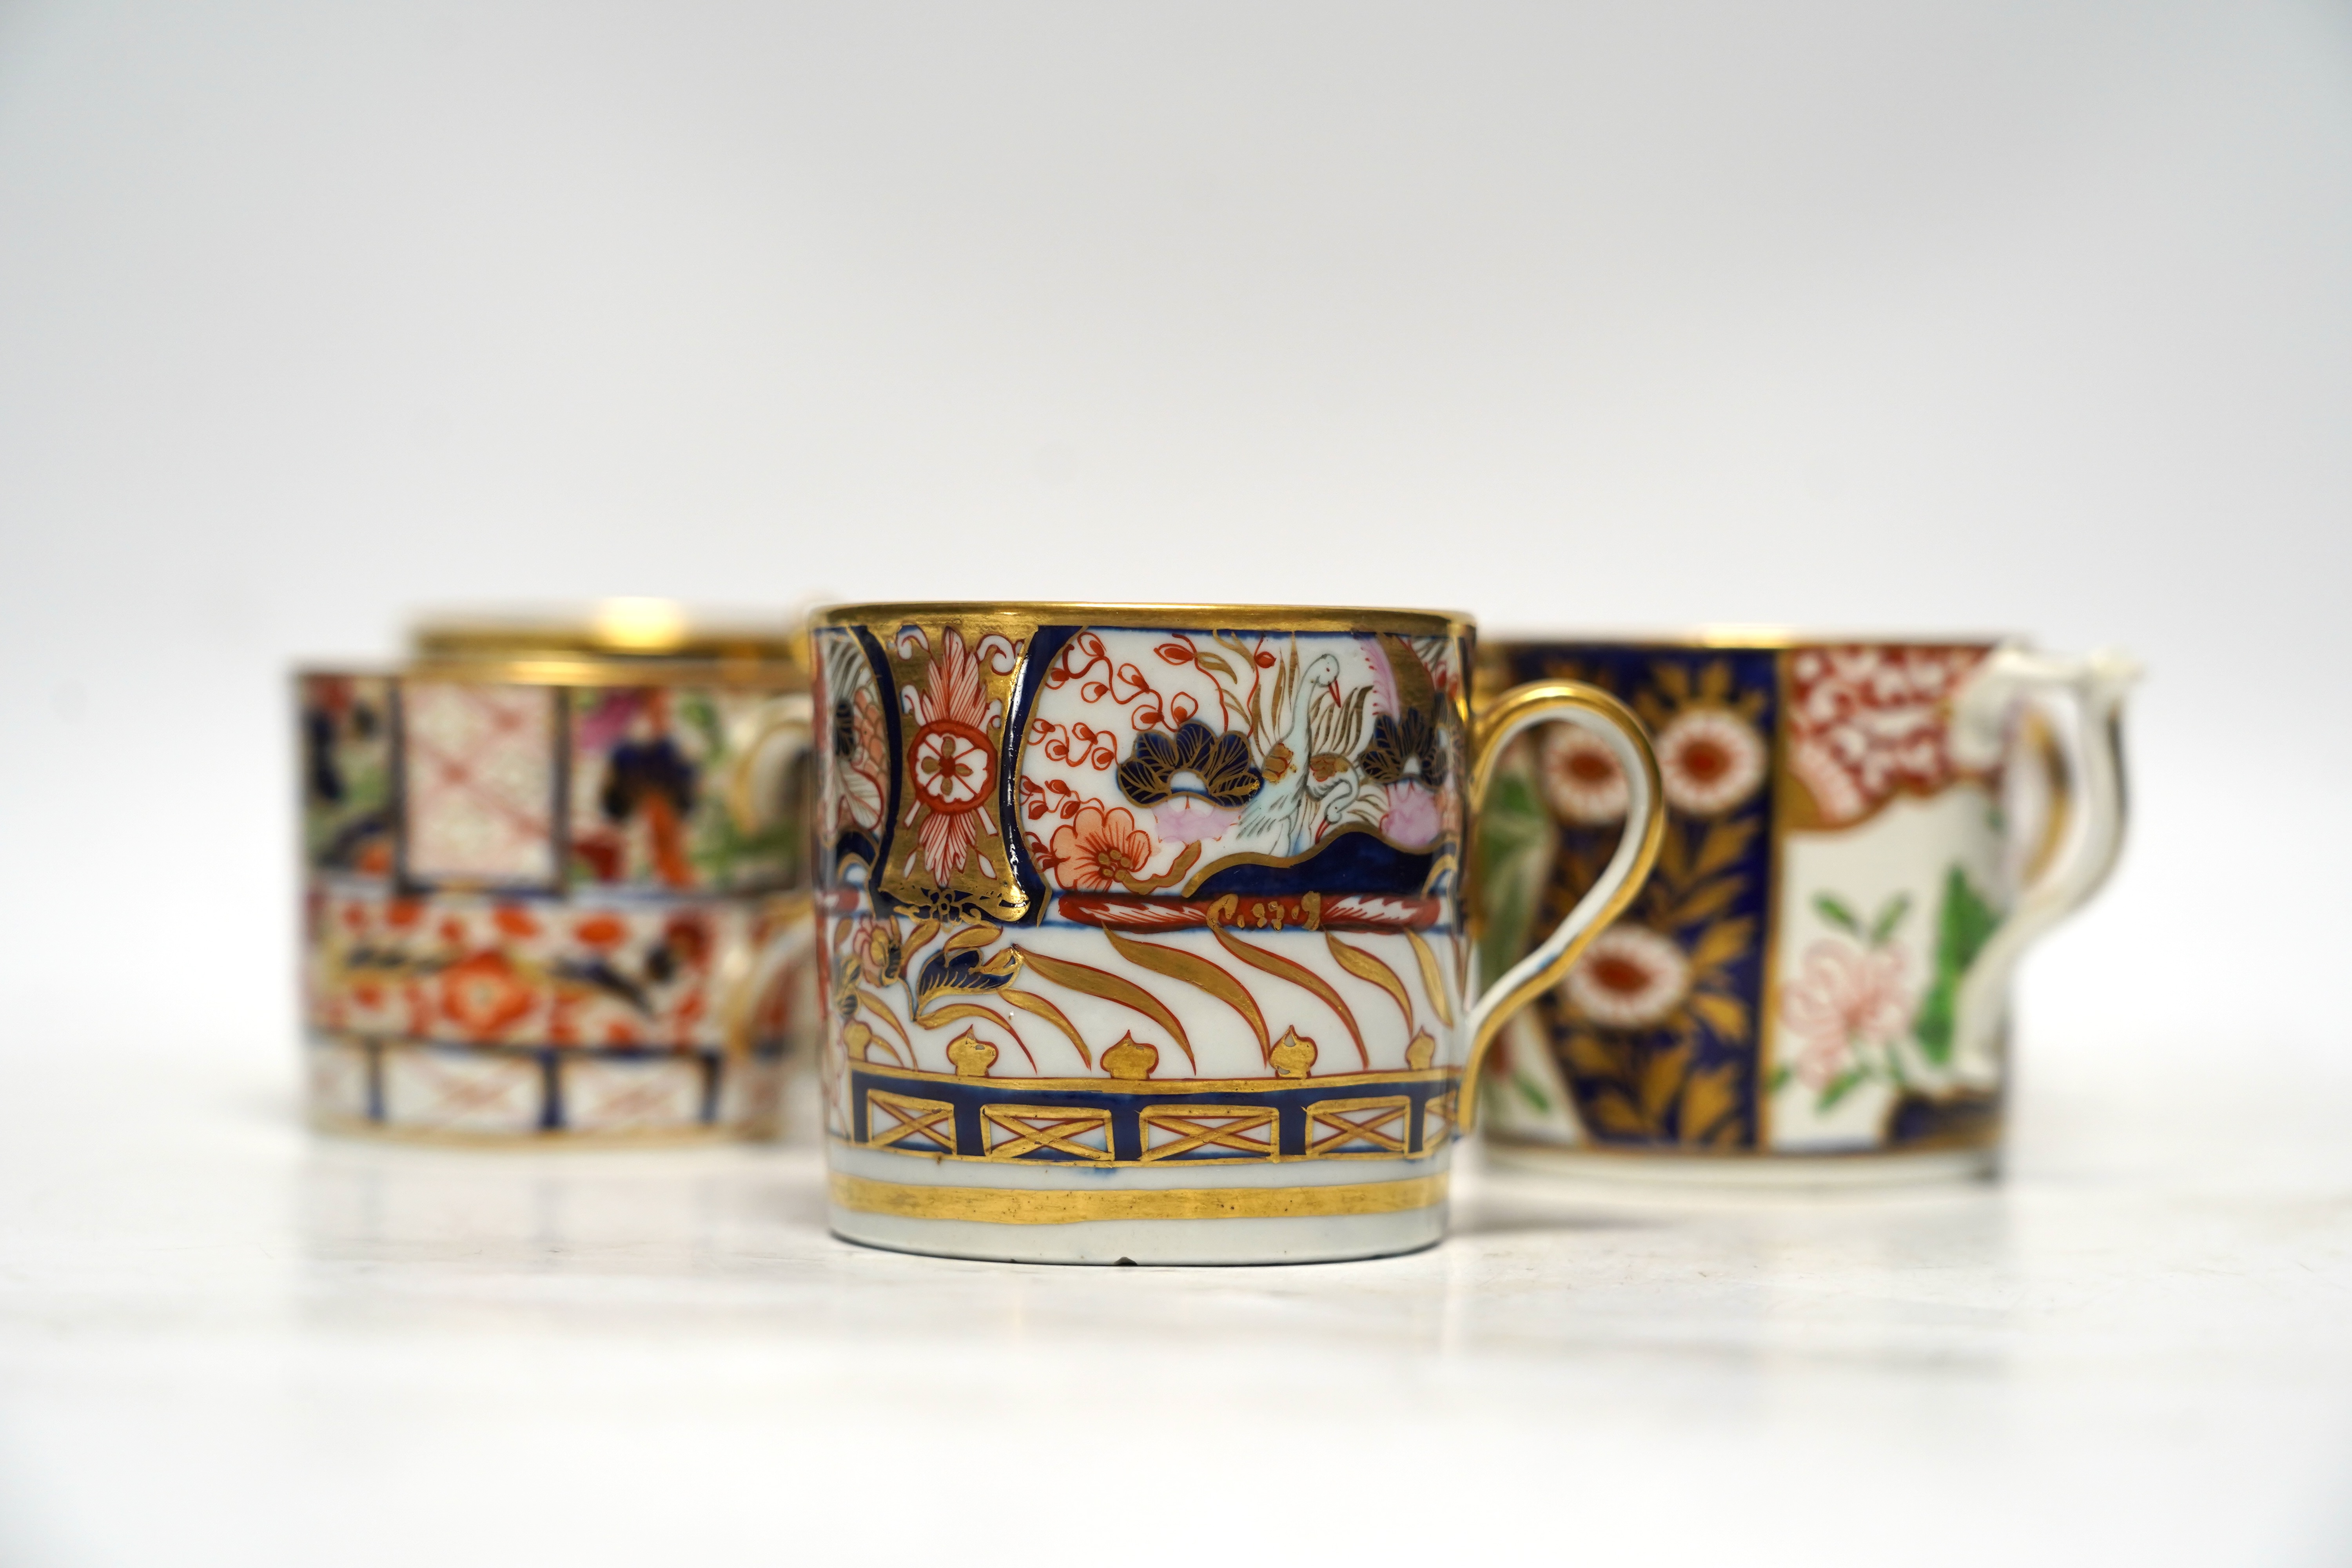 Seven 1800-1820 English porcelain coffee cans, including Imari pattern examples